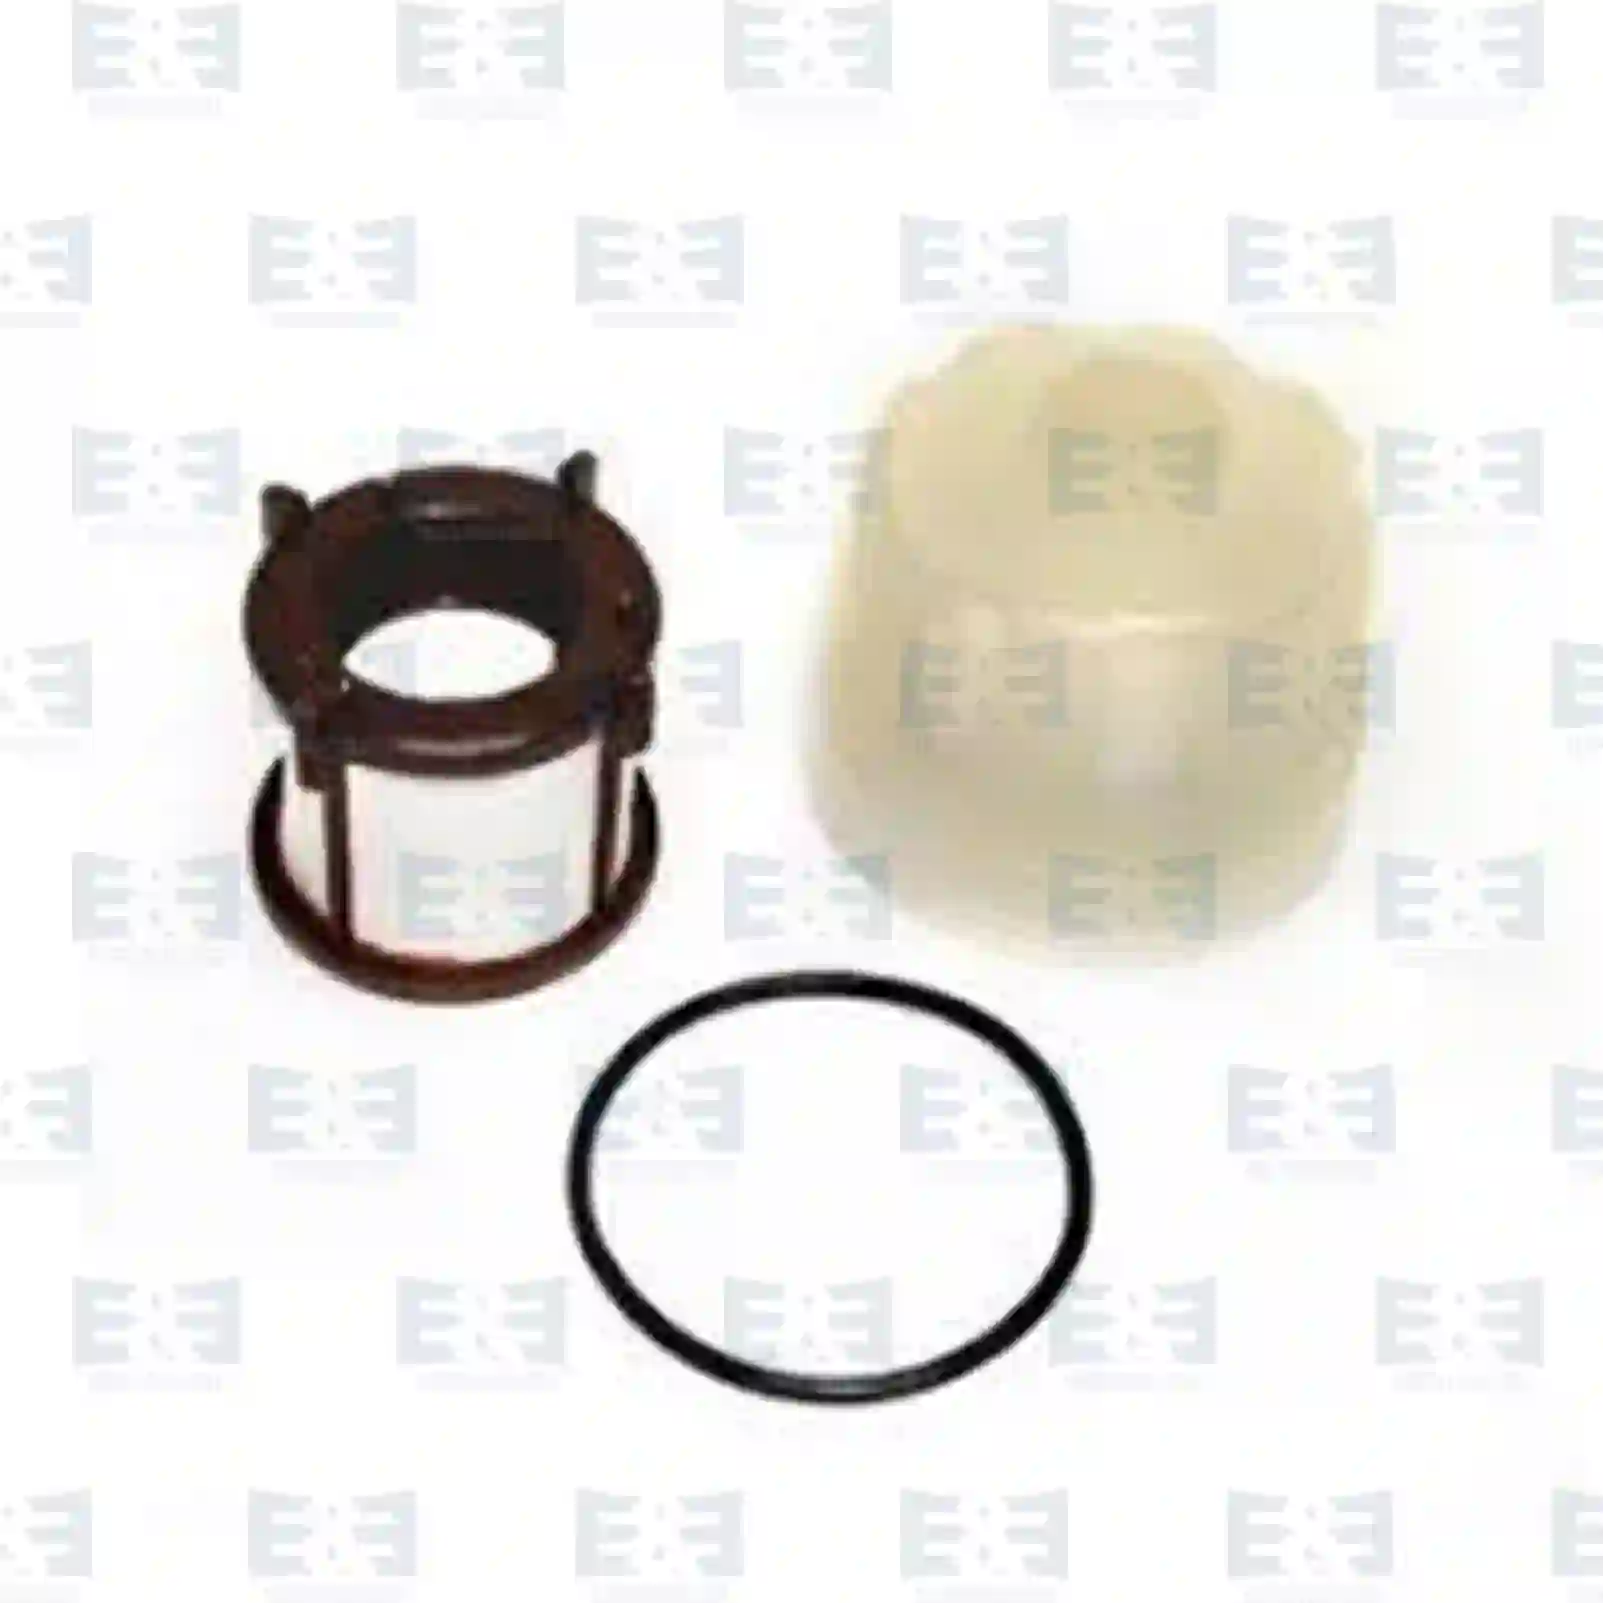 Filter repair kit, without filter housing, 2E2287843, 1438836, 1527478, 1529699, 1534424, 1683353, 571571308, 51125030043, 0000900751, 0000901351, 0000902051, 5001852912, 7424993611, ZG10413-0008 ||  2E2287843 E&E Truck Spare Parts | Truck Spare Parts, Auotomotive Spare Parts Filter repair kit, without filter housing, 2E2287843, 1438836, 1527478, 1529699, 1534424, 1683353, 571571308, 51125030043, 0000900751, 0000901351, 0000902051, 5001852912, 7424993611, ZG10413-0008 ||  2E2287843 E&E Truck Spare Parts | Truck Spare Parts, Auotomotive Spare Parts